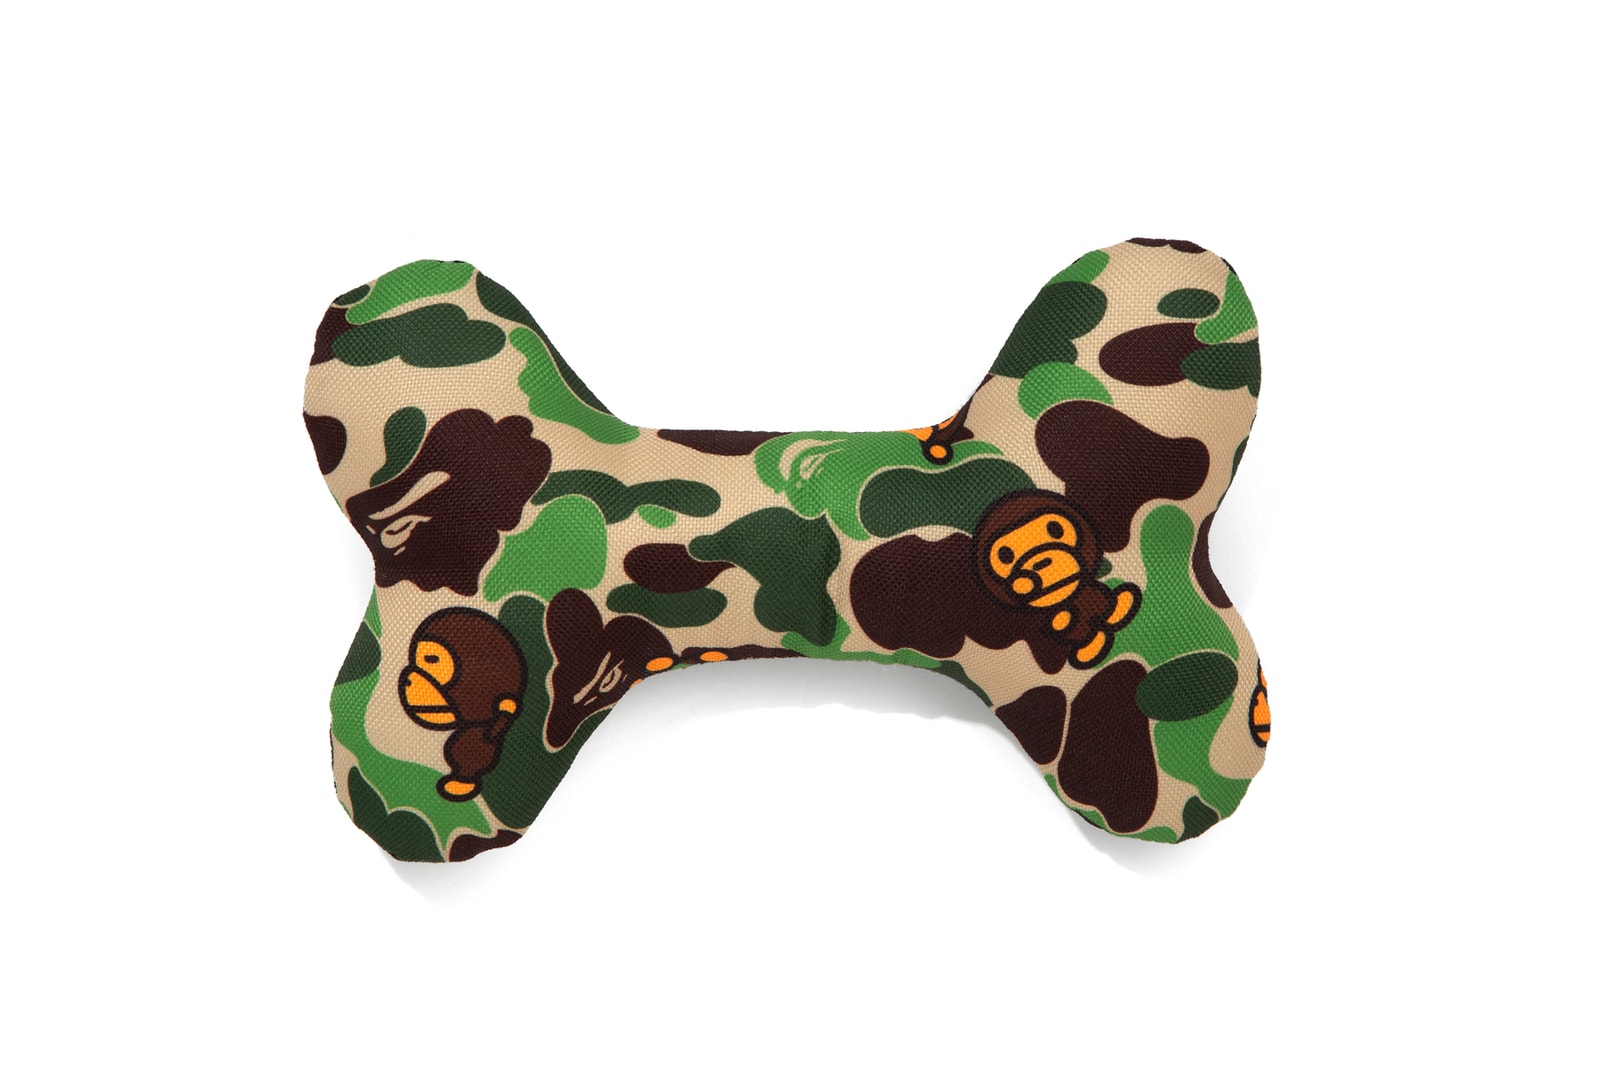 Baby Milo Pet Accessories Fall/Winter 2019 dogs cats camouflage print bape a bain monkey beds bags toys monkey head